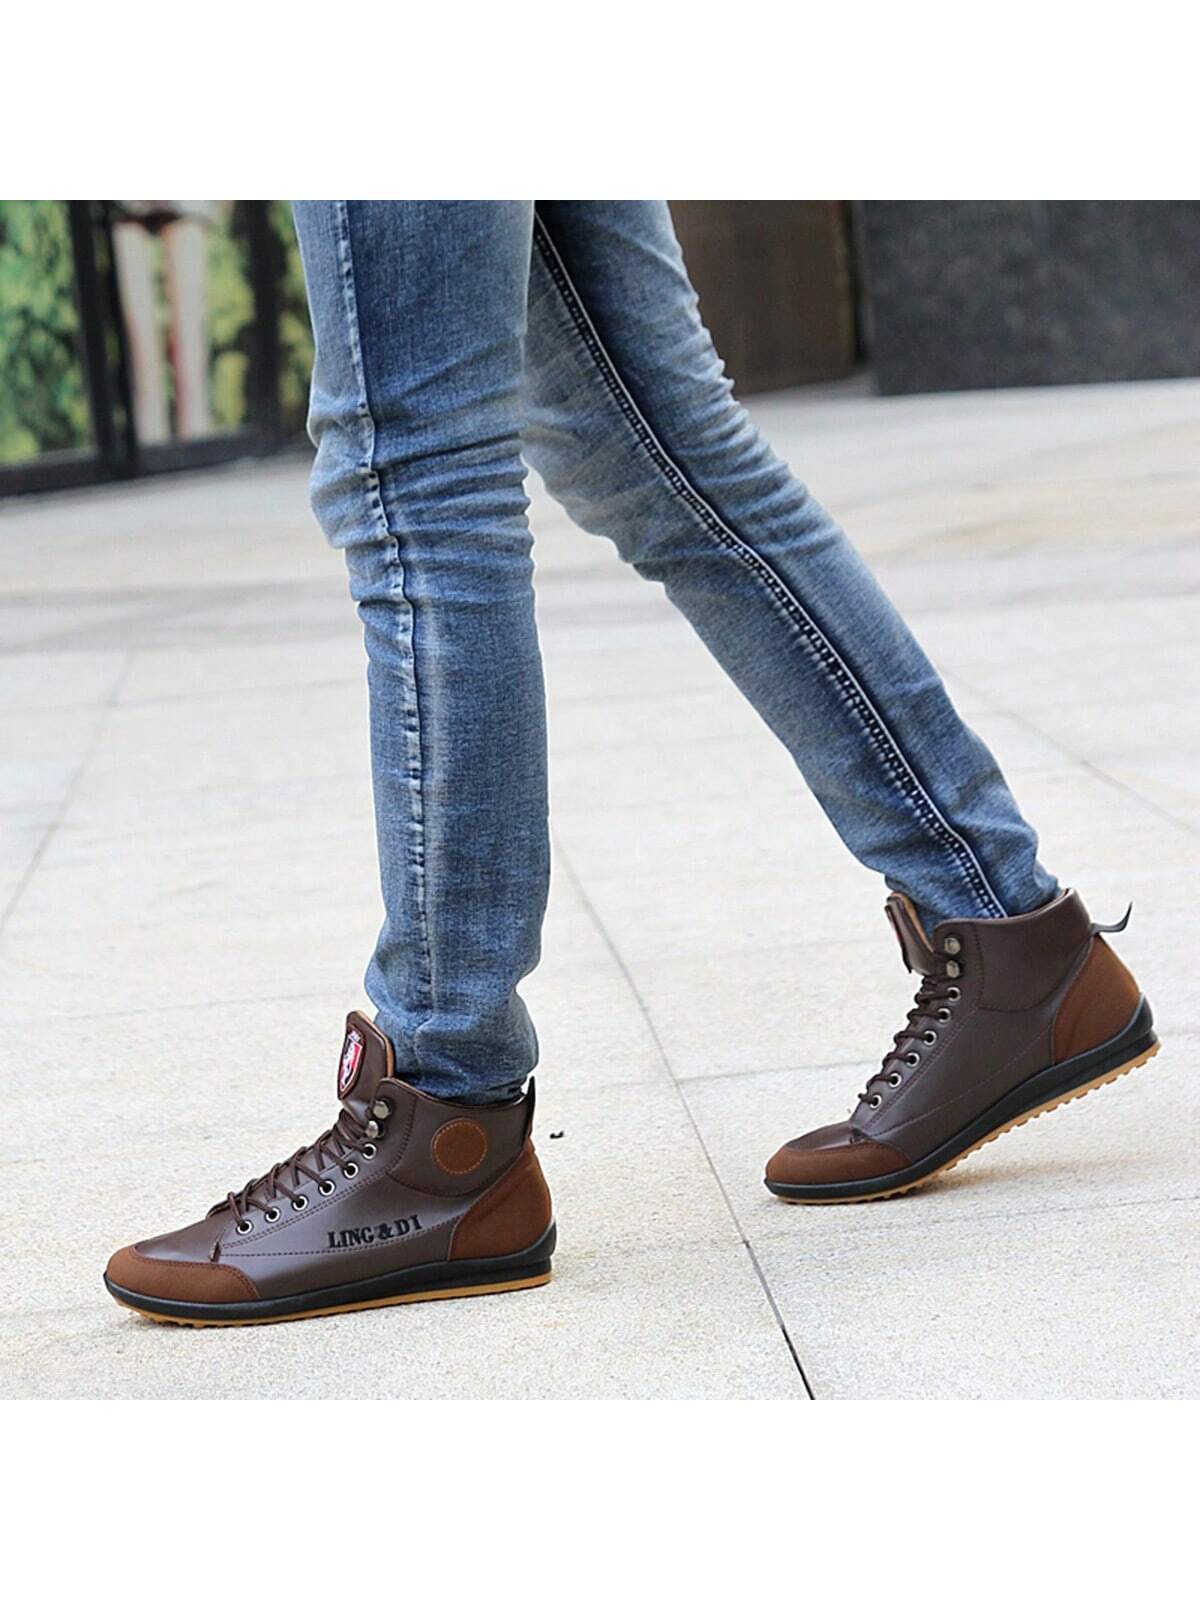 Men's Mid-top Lace-up Work Shoe With Anti-slip Sole, Casual And Comfortable Sneaker With Good Breathability And Unique Style, Suitable For Driving